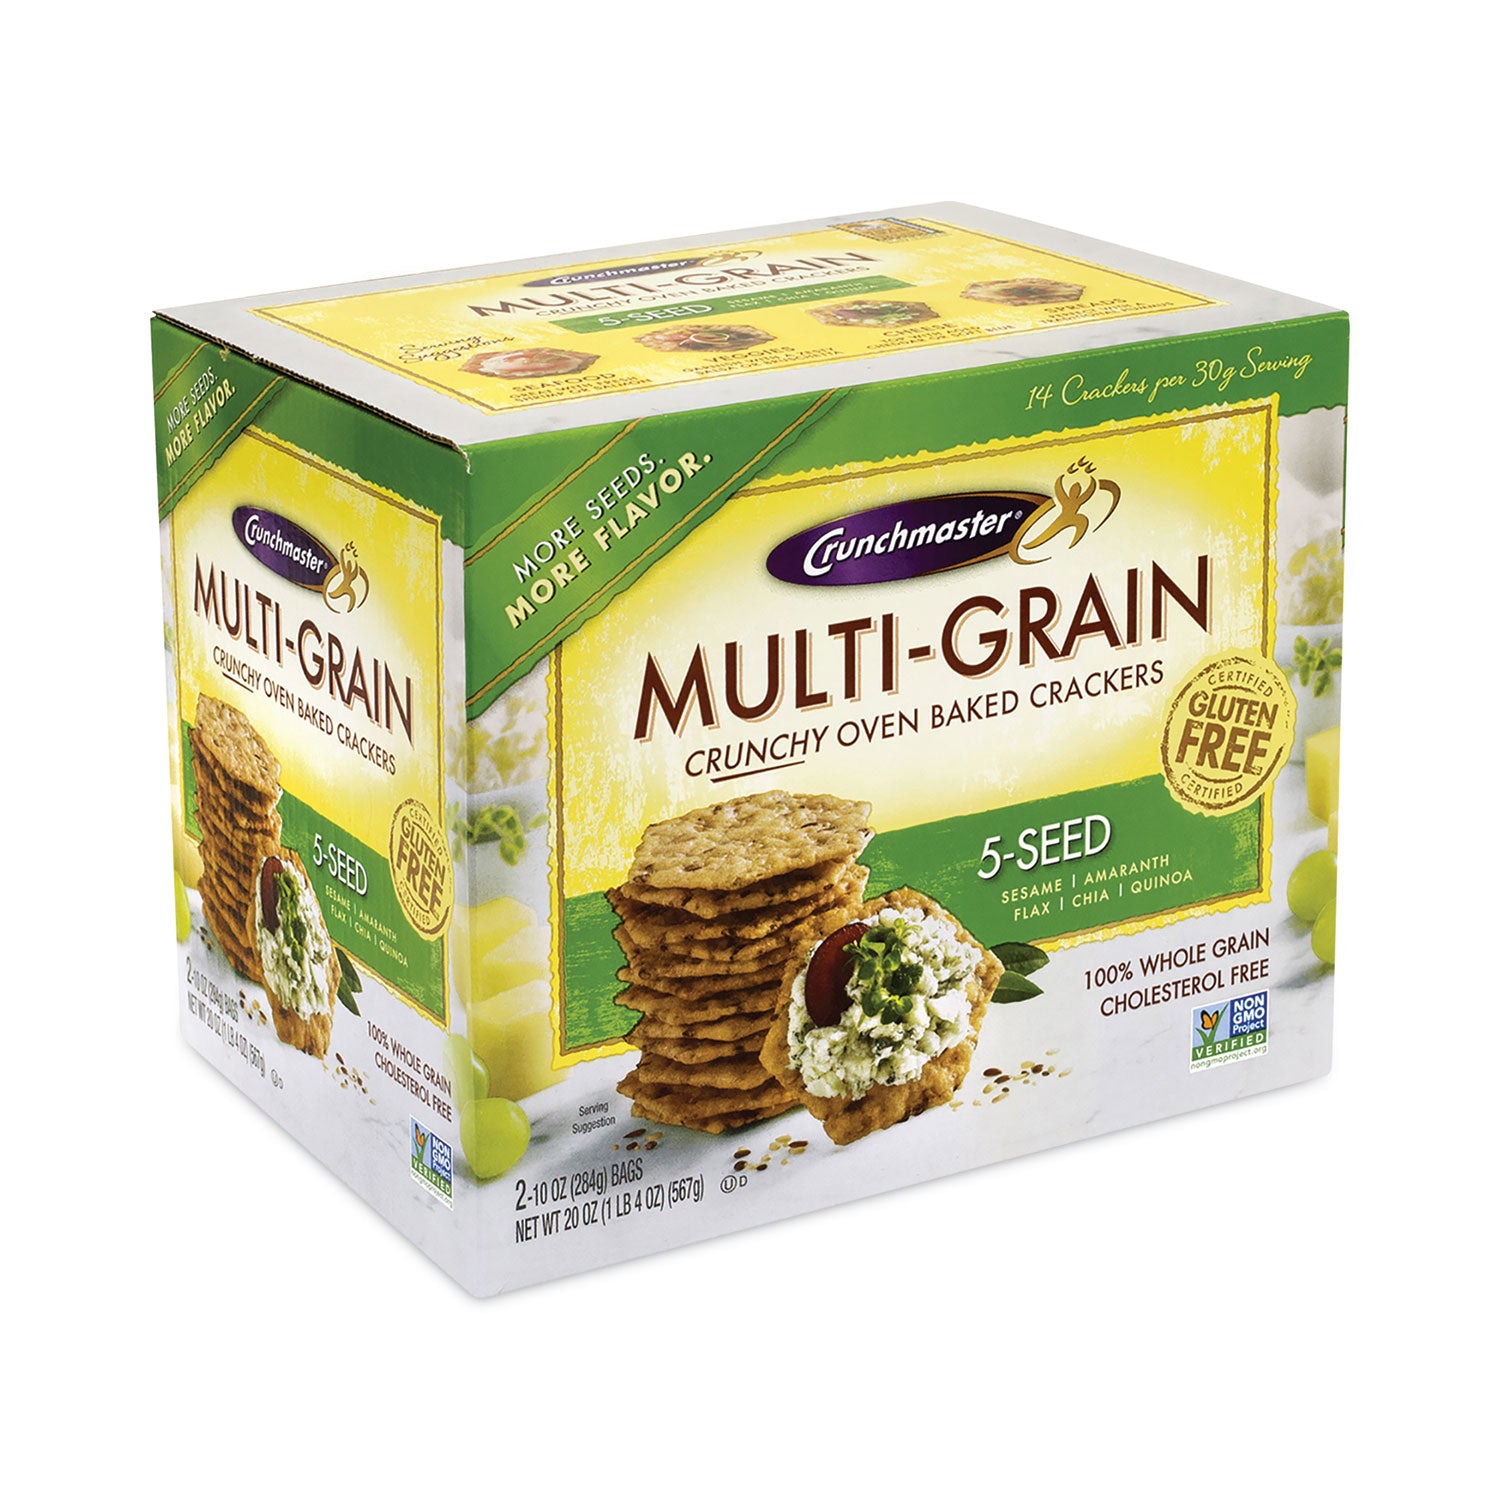 5-seed-multi-grain-crunchy-oven-baked-crackers-whole-wheat-10-oz-bag-2-bags-box-ships-in-1-3-business-days_grr22000757 - 2